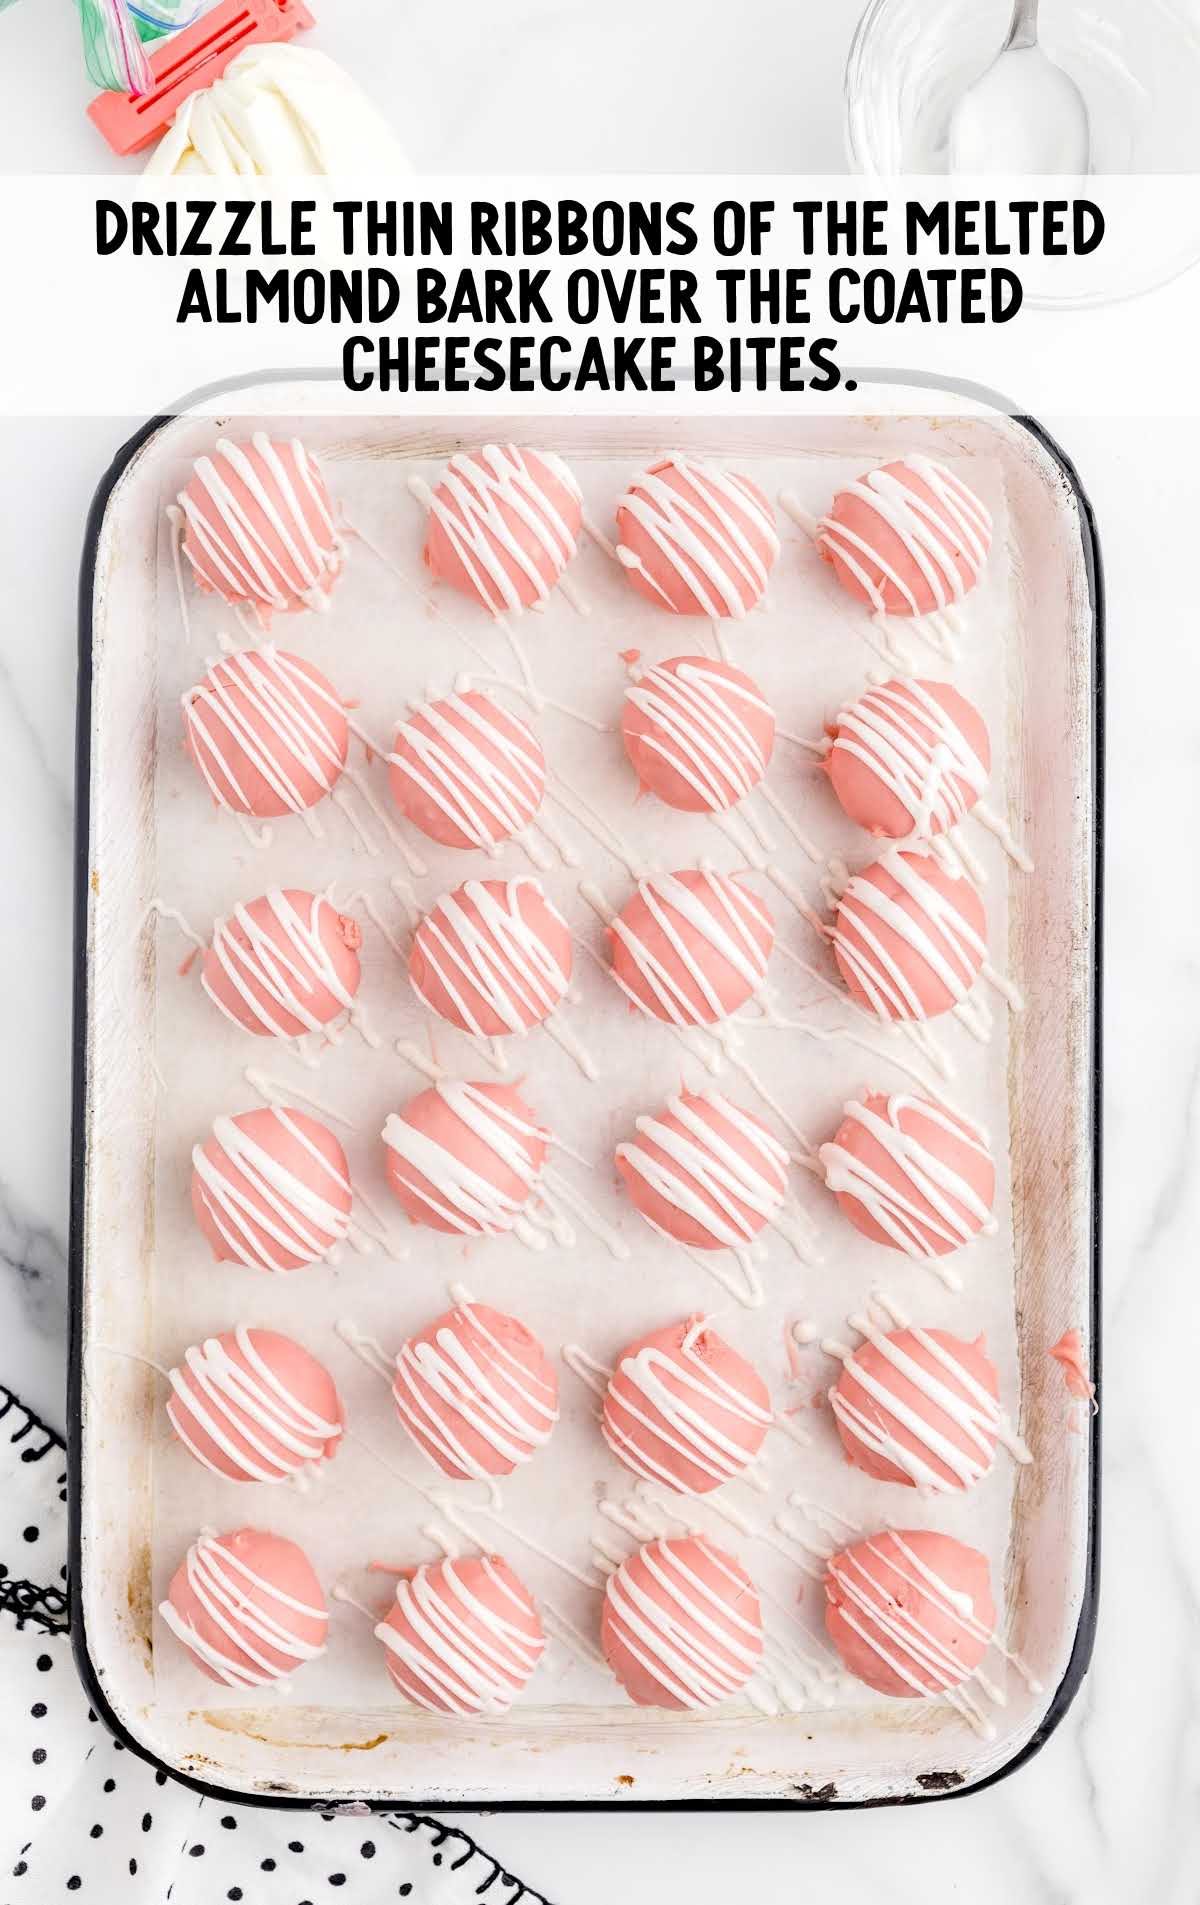 melted chocolate almond bark drizzled on top of the cheesecake bites